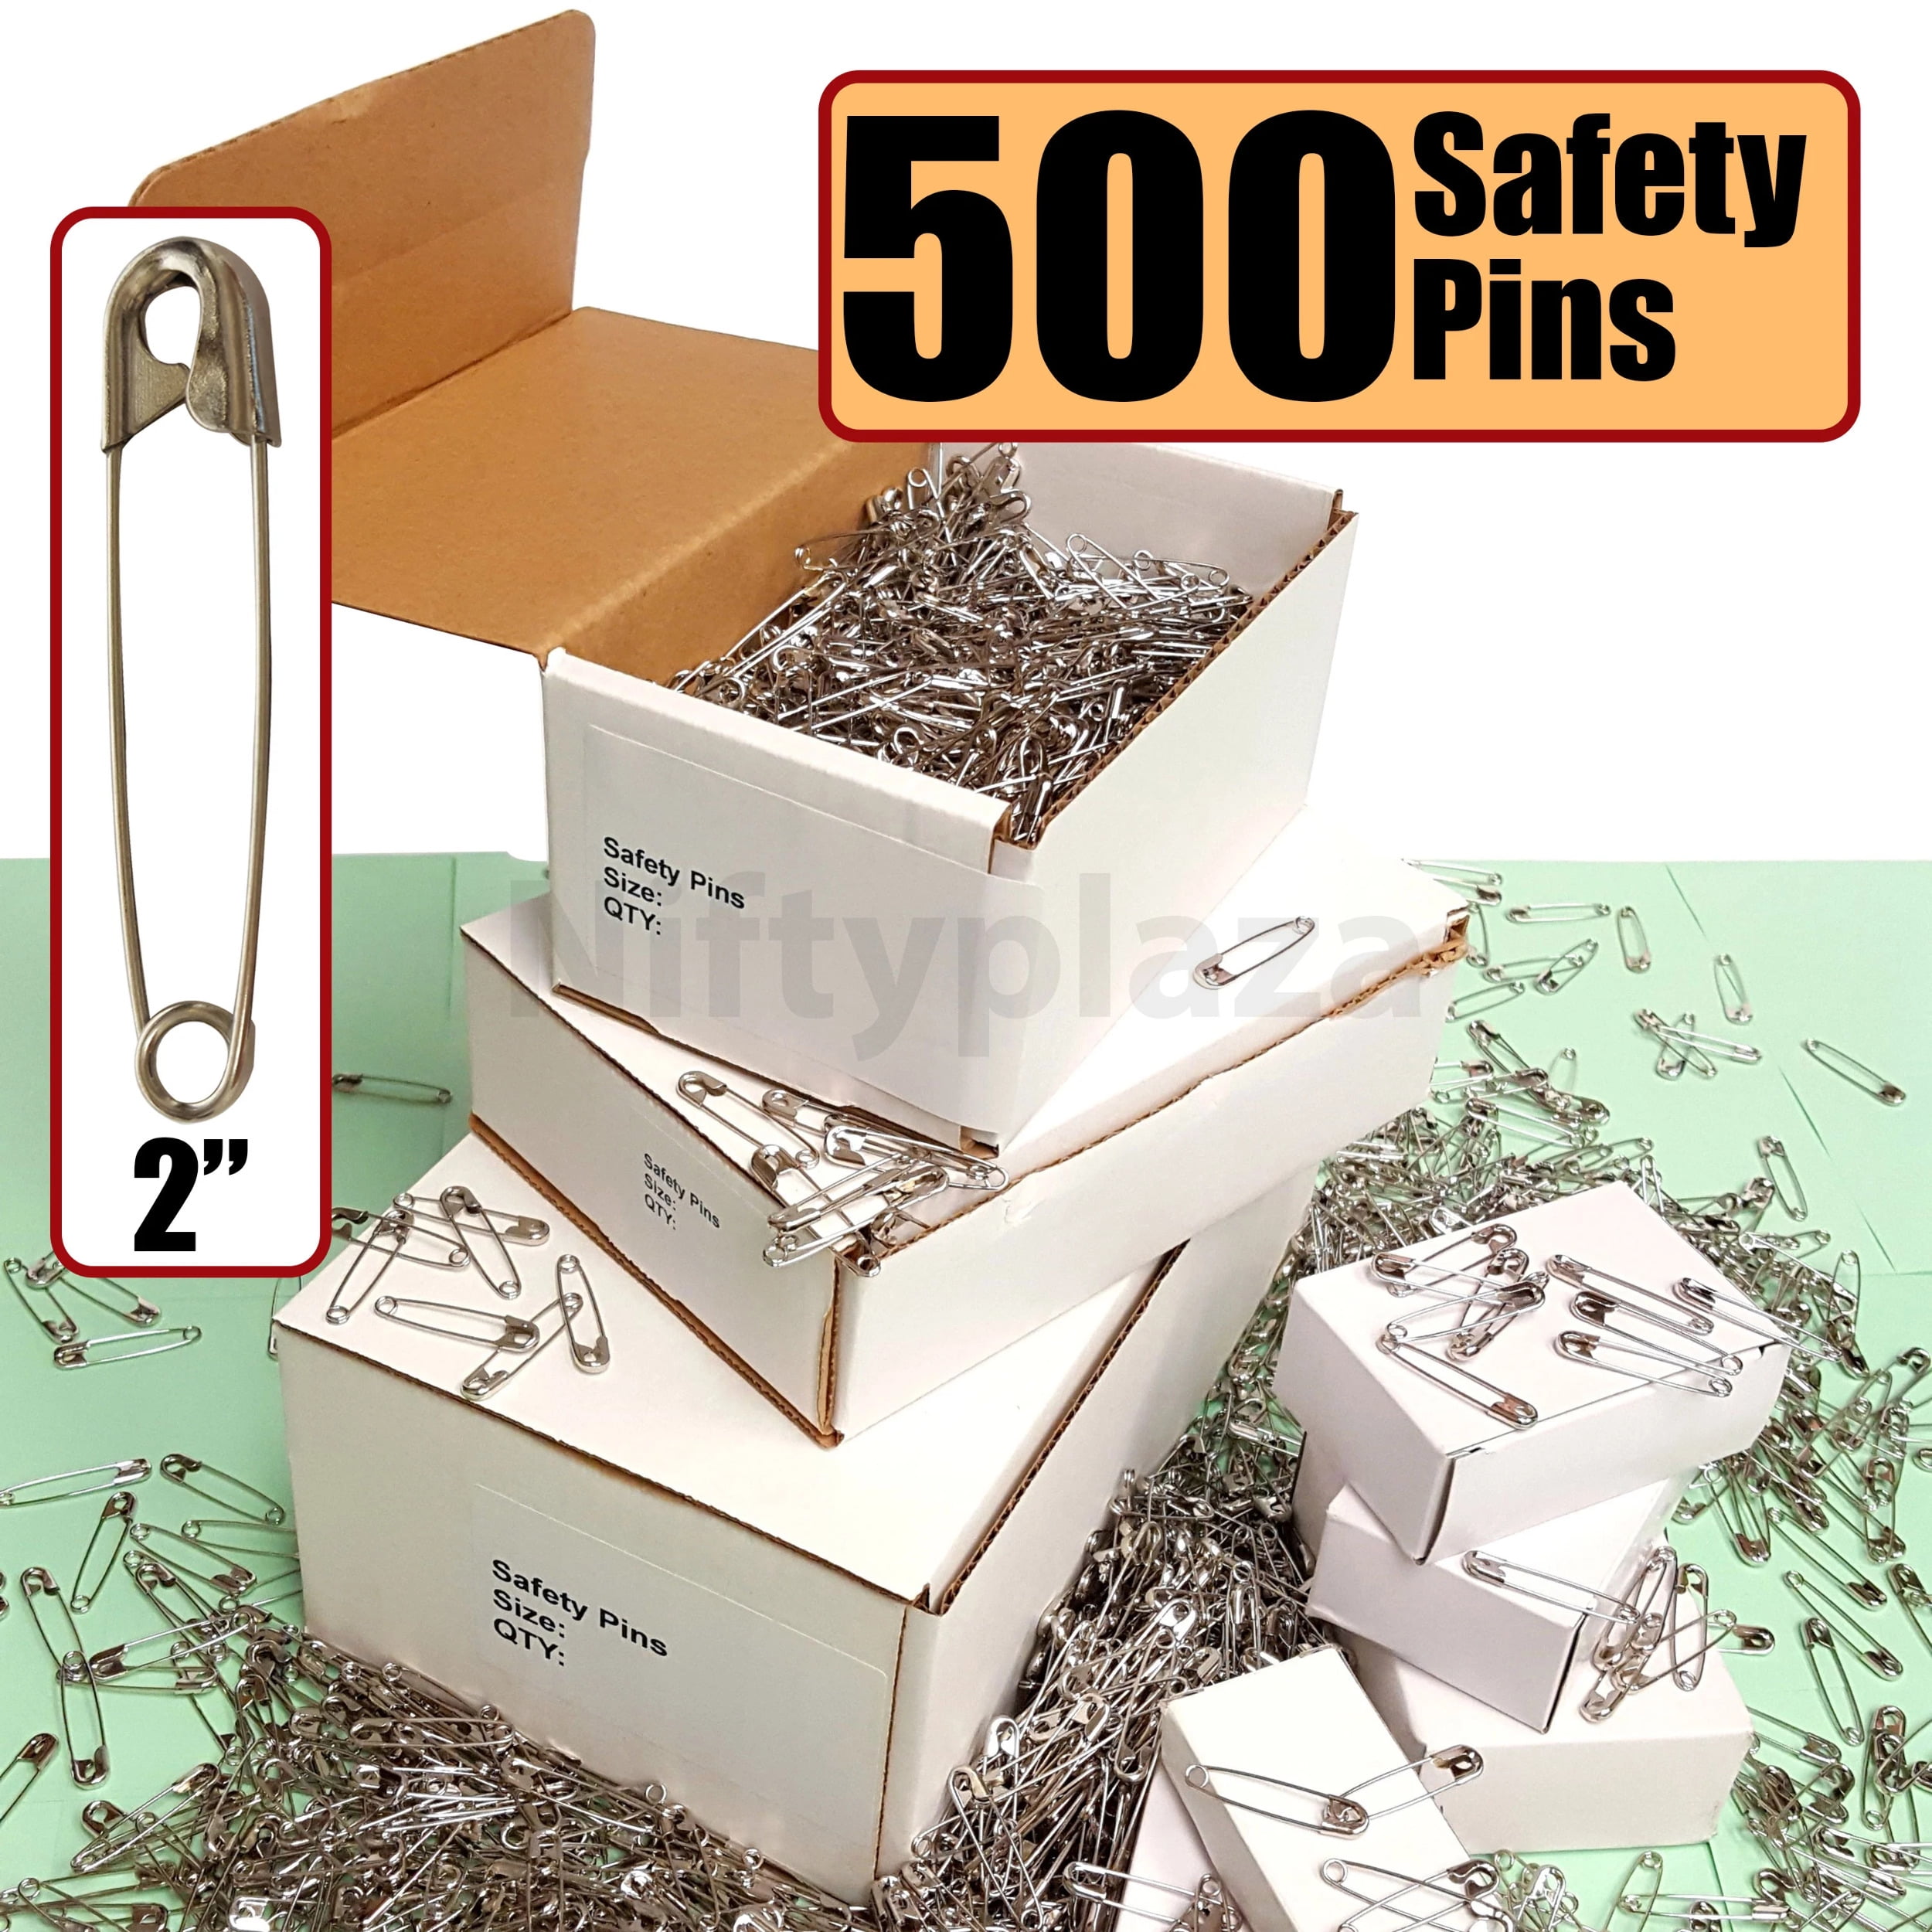 NiftyPlaza Extra Large Safety Pins, Size 2 Inch, 200 Safety Pins, Heav –